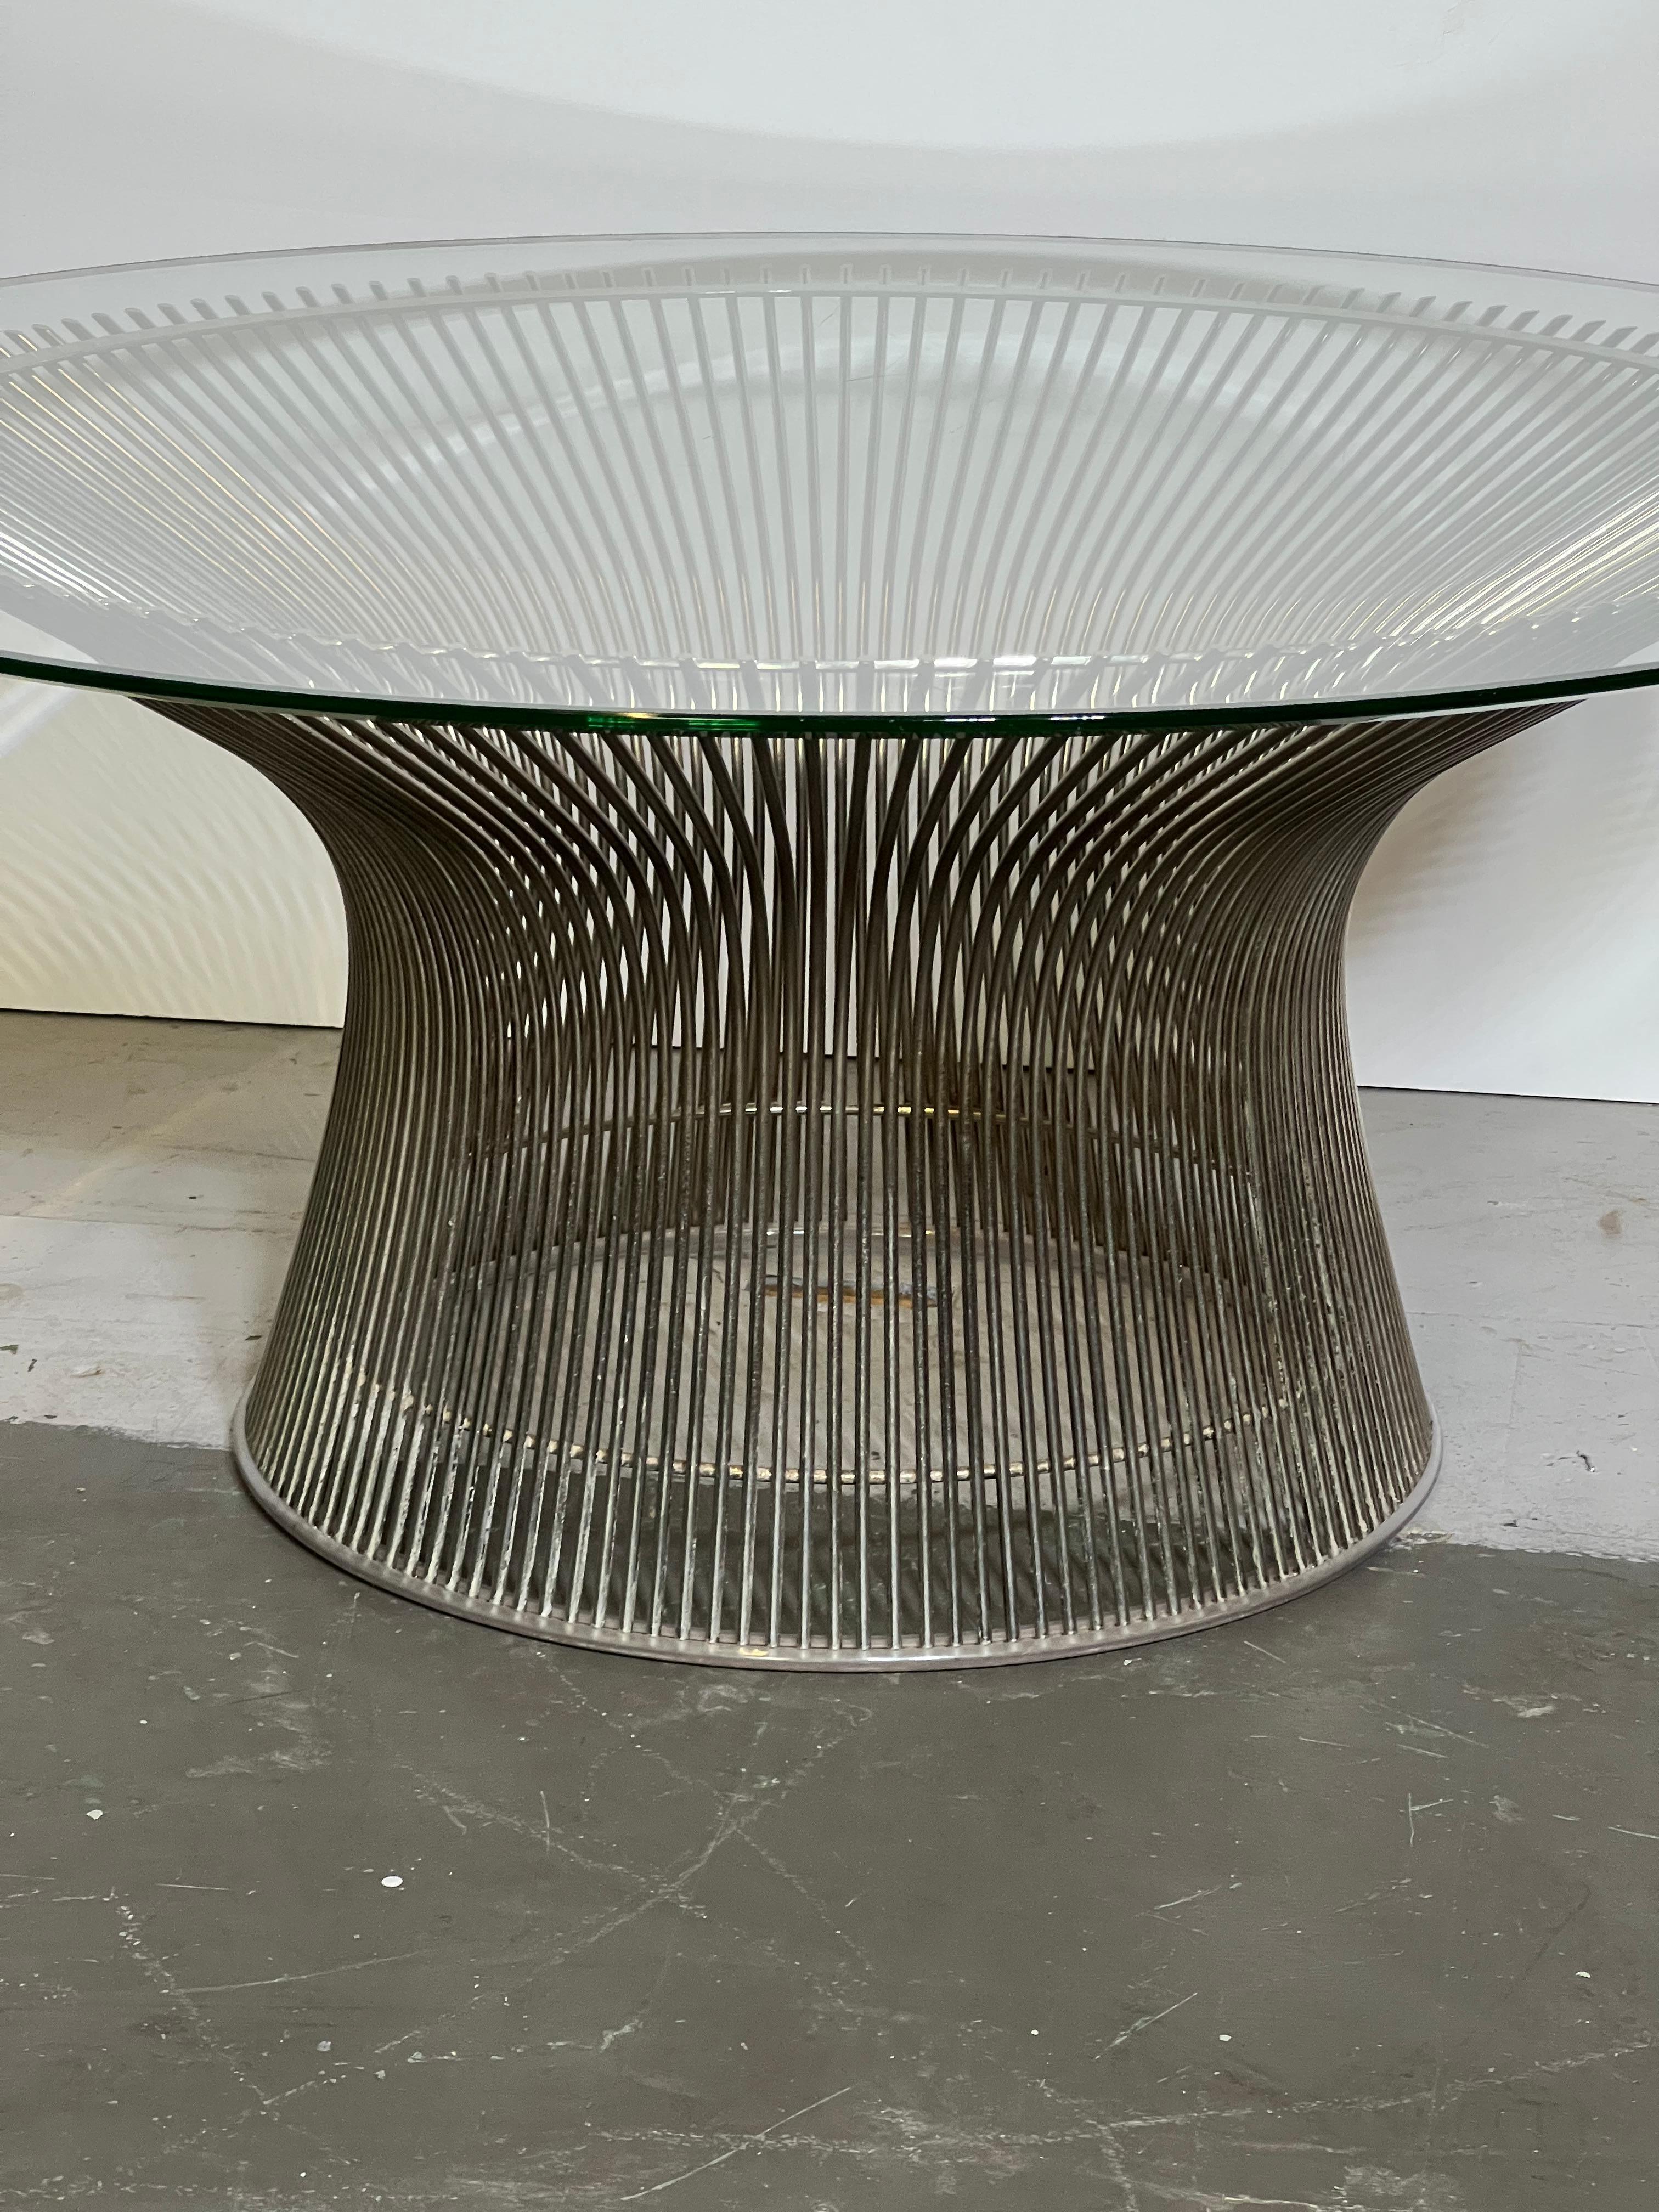 Warren Platner (1919 –2006) was an American architect and interior designer.
His career began with work in some of the most prominent and remarkable architecture practices in the country. Between 1945 and 1950, he worked for Raymond Loewy and I.M.